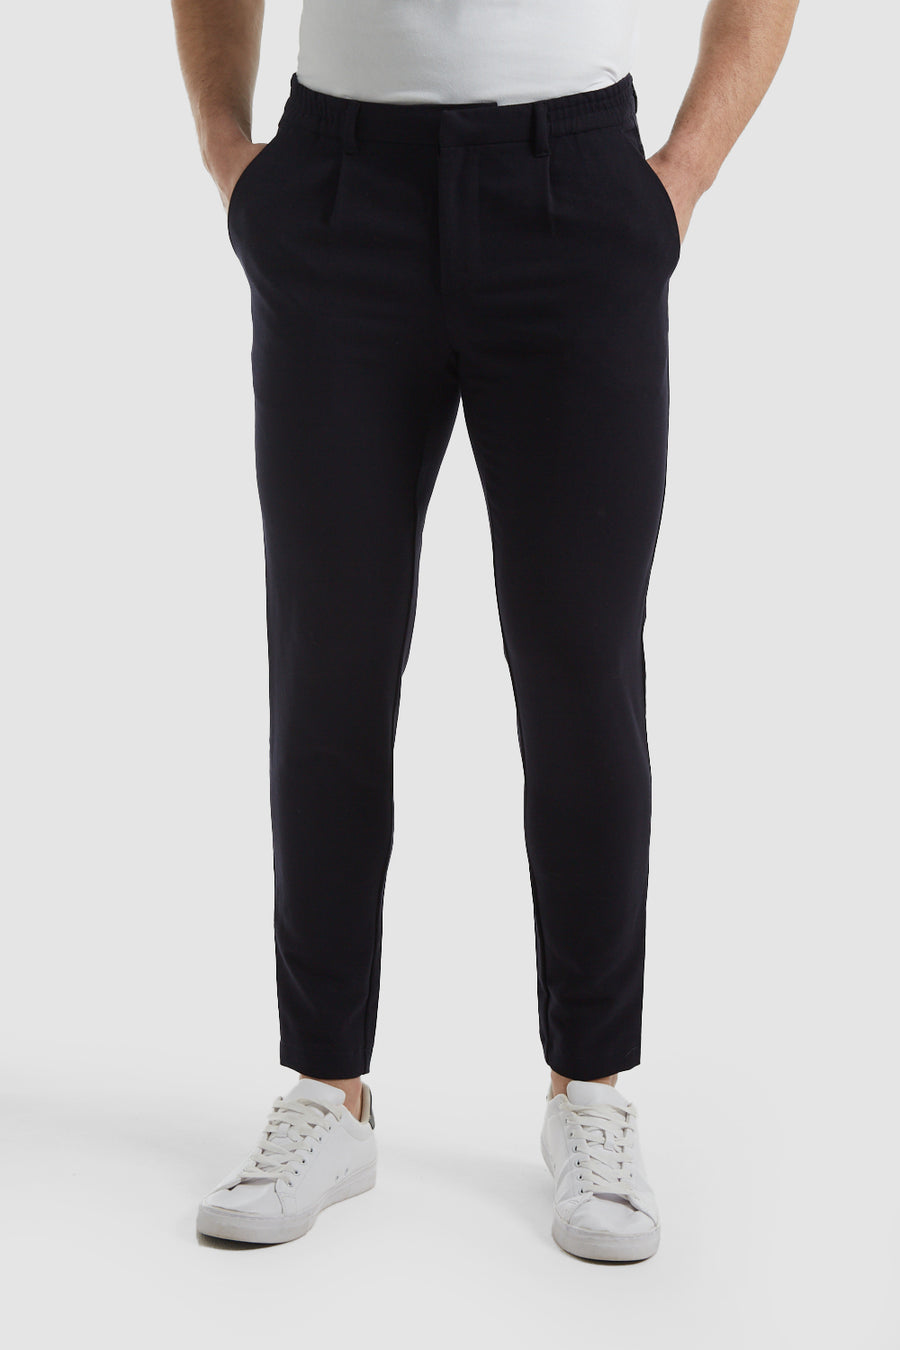 Muscle Fit Trousers - TAILORED ATHLETE